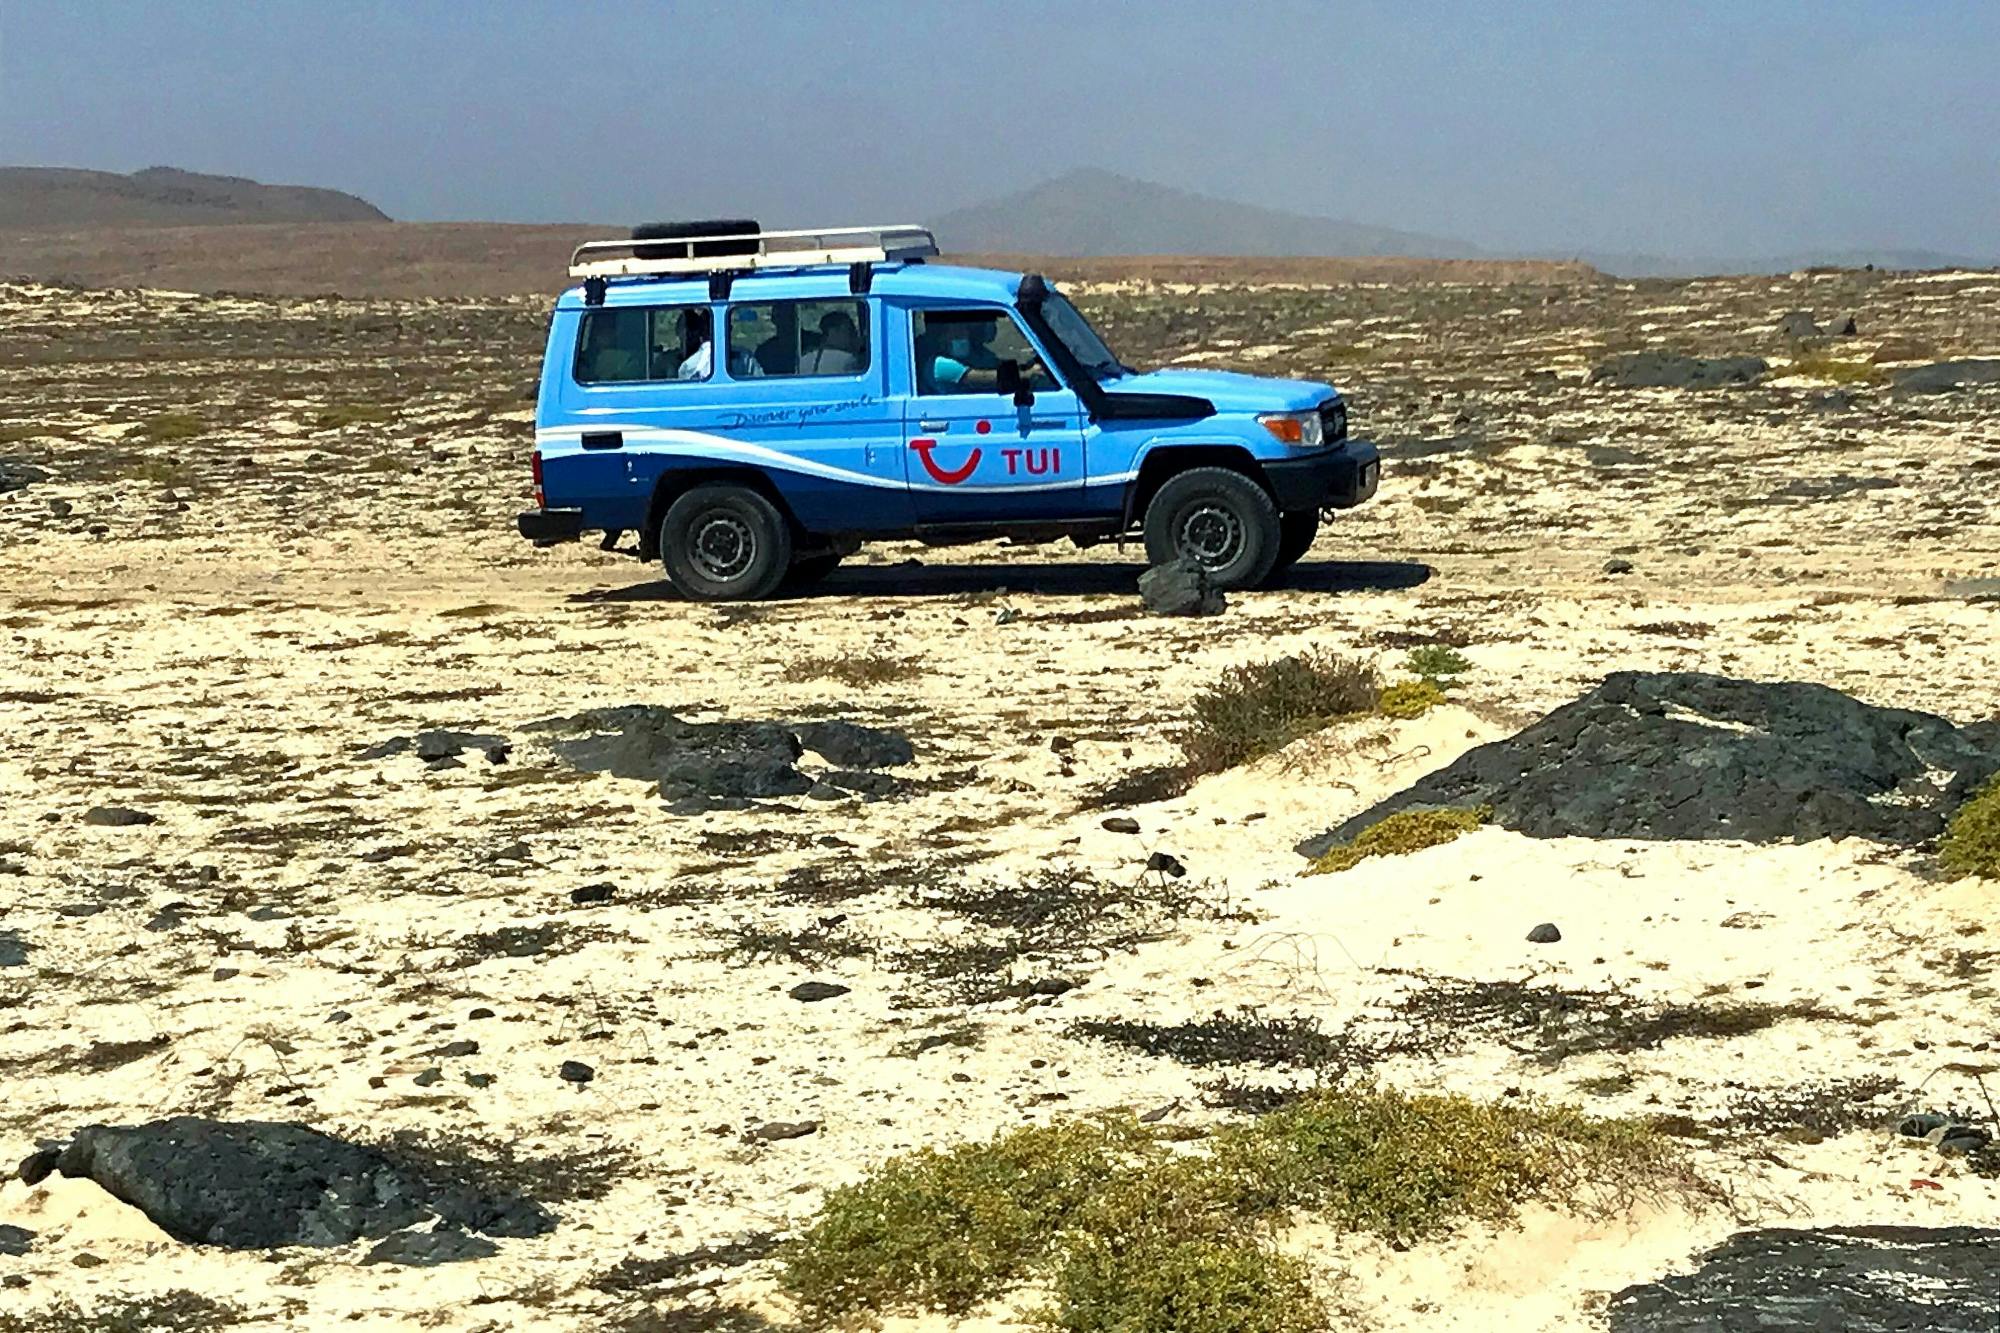 Boa Vista 4x4 Tour with Catchupa Demonstration and Lunch